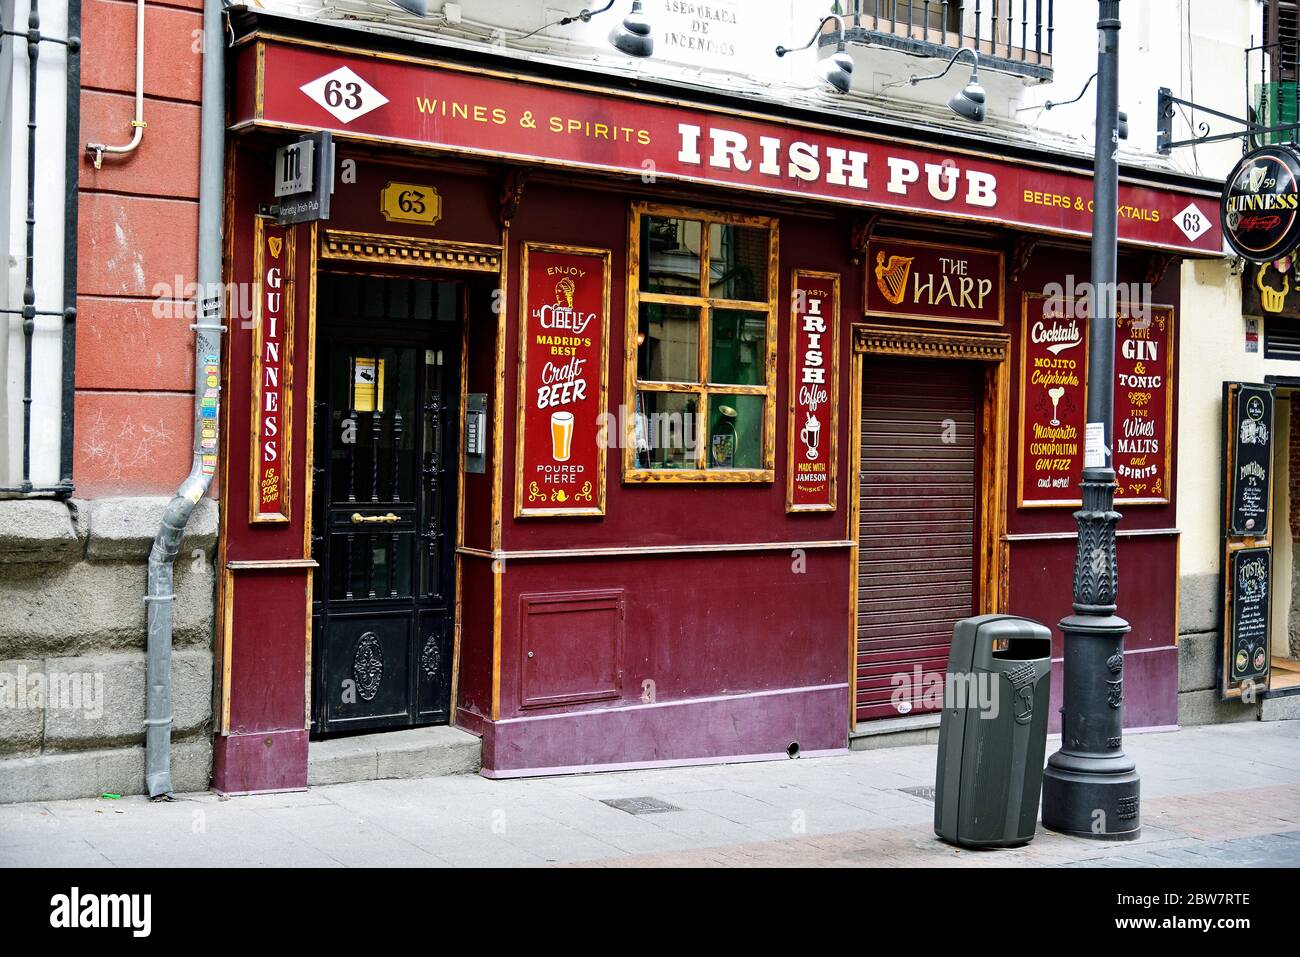 MADRID / SPAIN - APRIL 11, 2019 - Branch of The Harp Irish themed pub located in center of Madrid, Spain Stock Photo